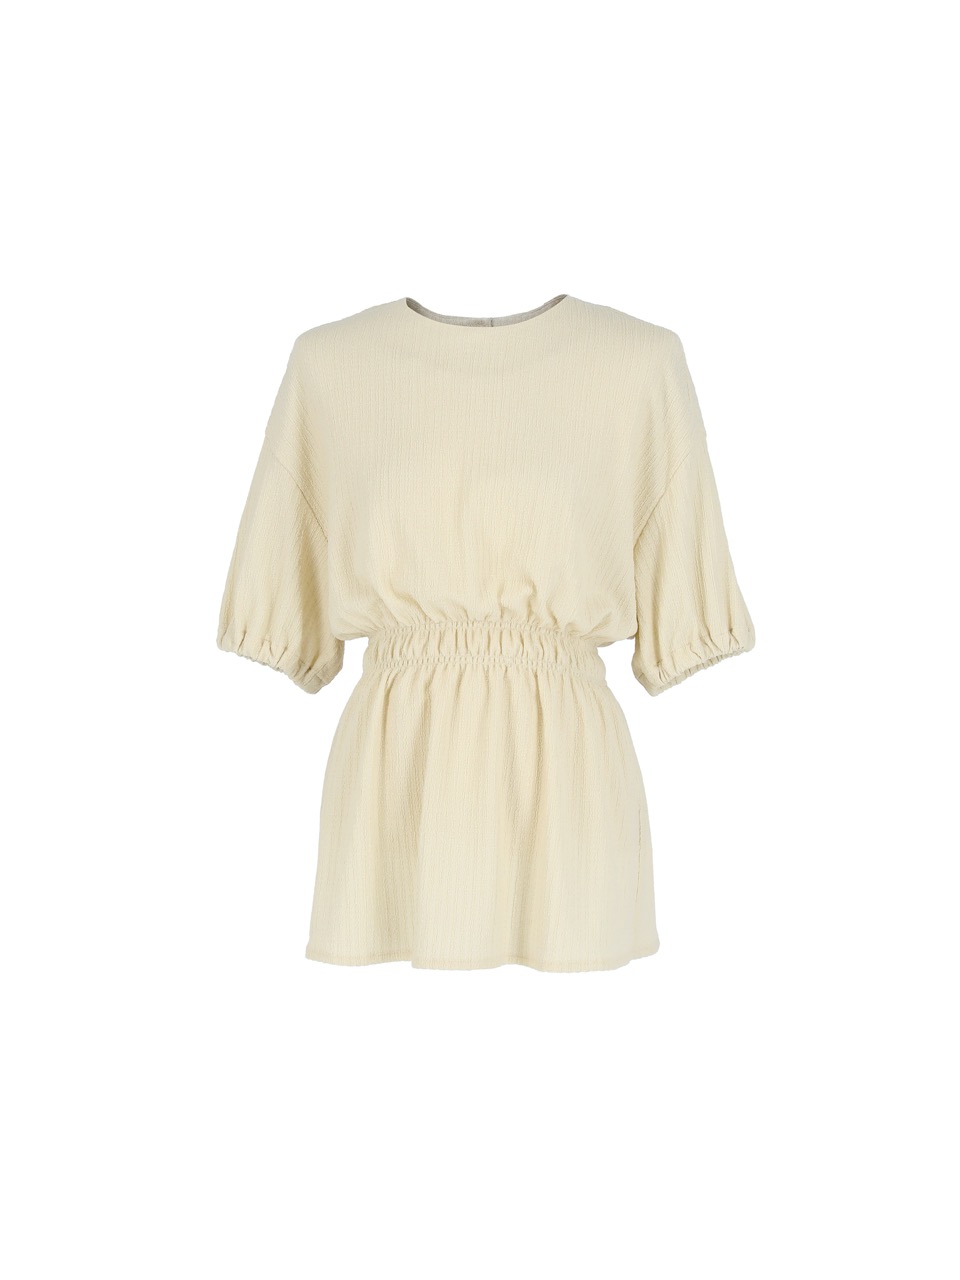 5S Puff-Sleeve crinkled Blouse - Ivory